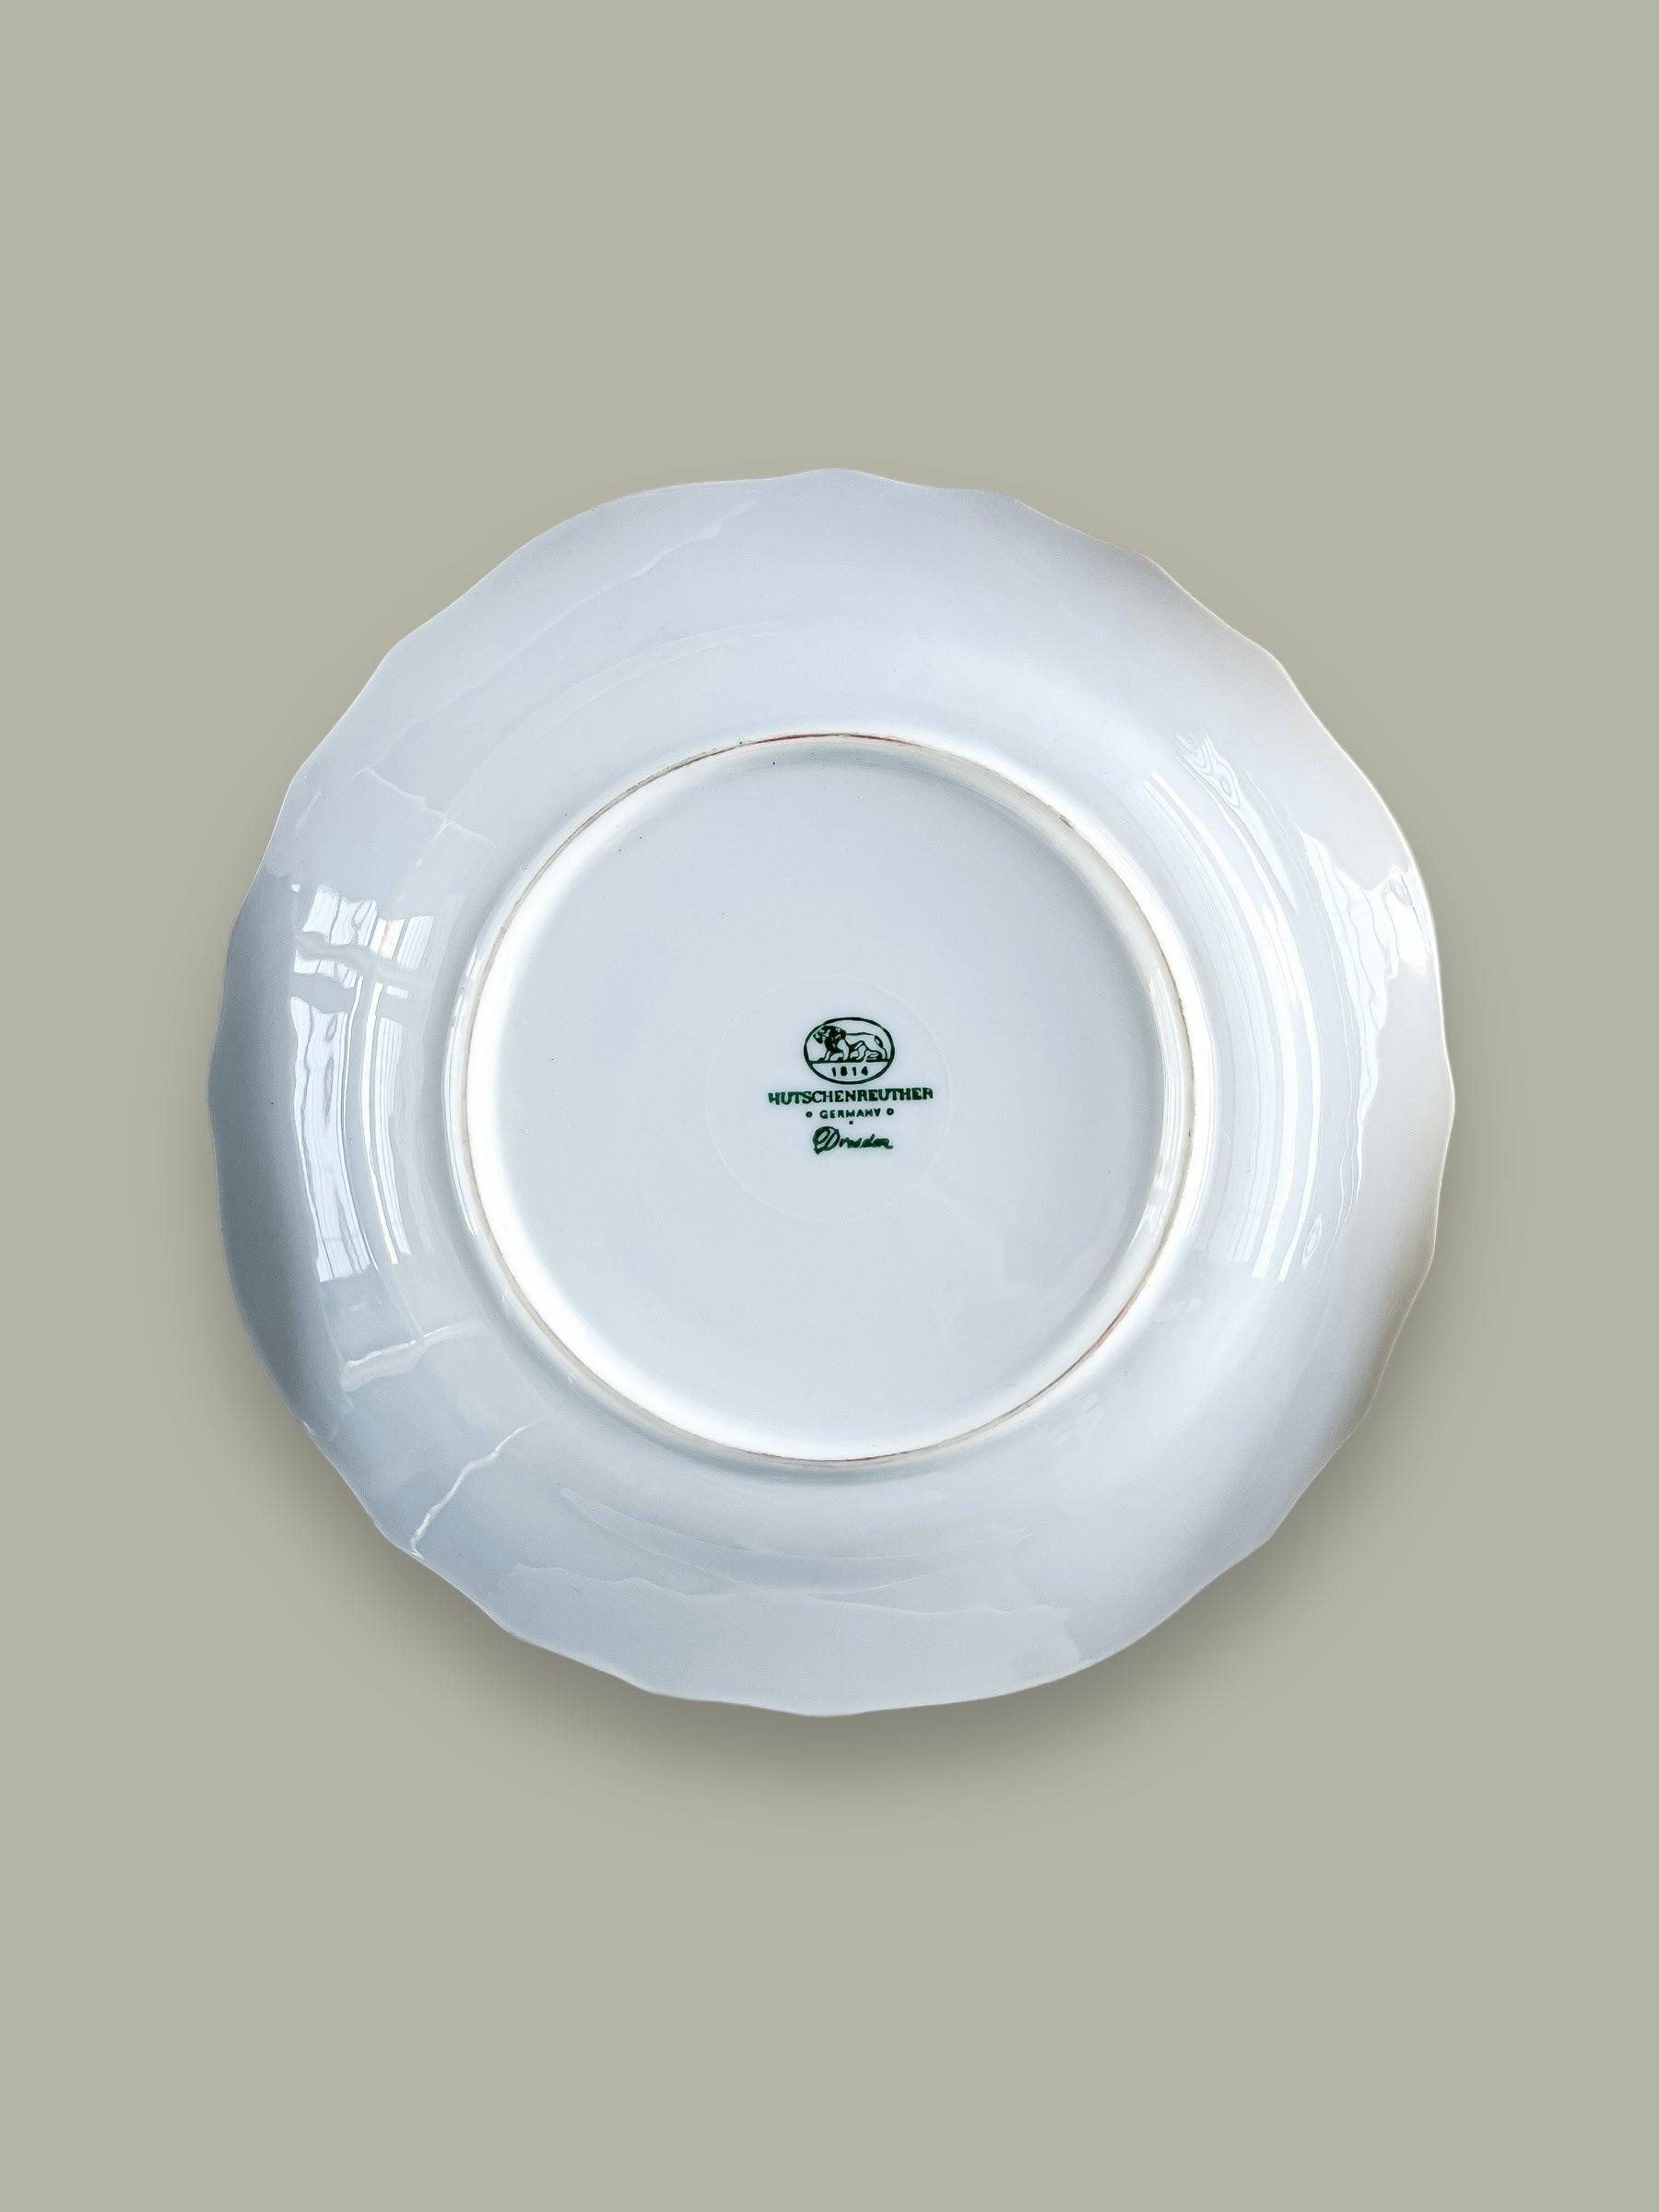 Hutschenreuther Dessert Plate Set of 6 - 'Dresden' Collection in White - SOSC Home